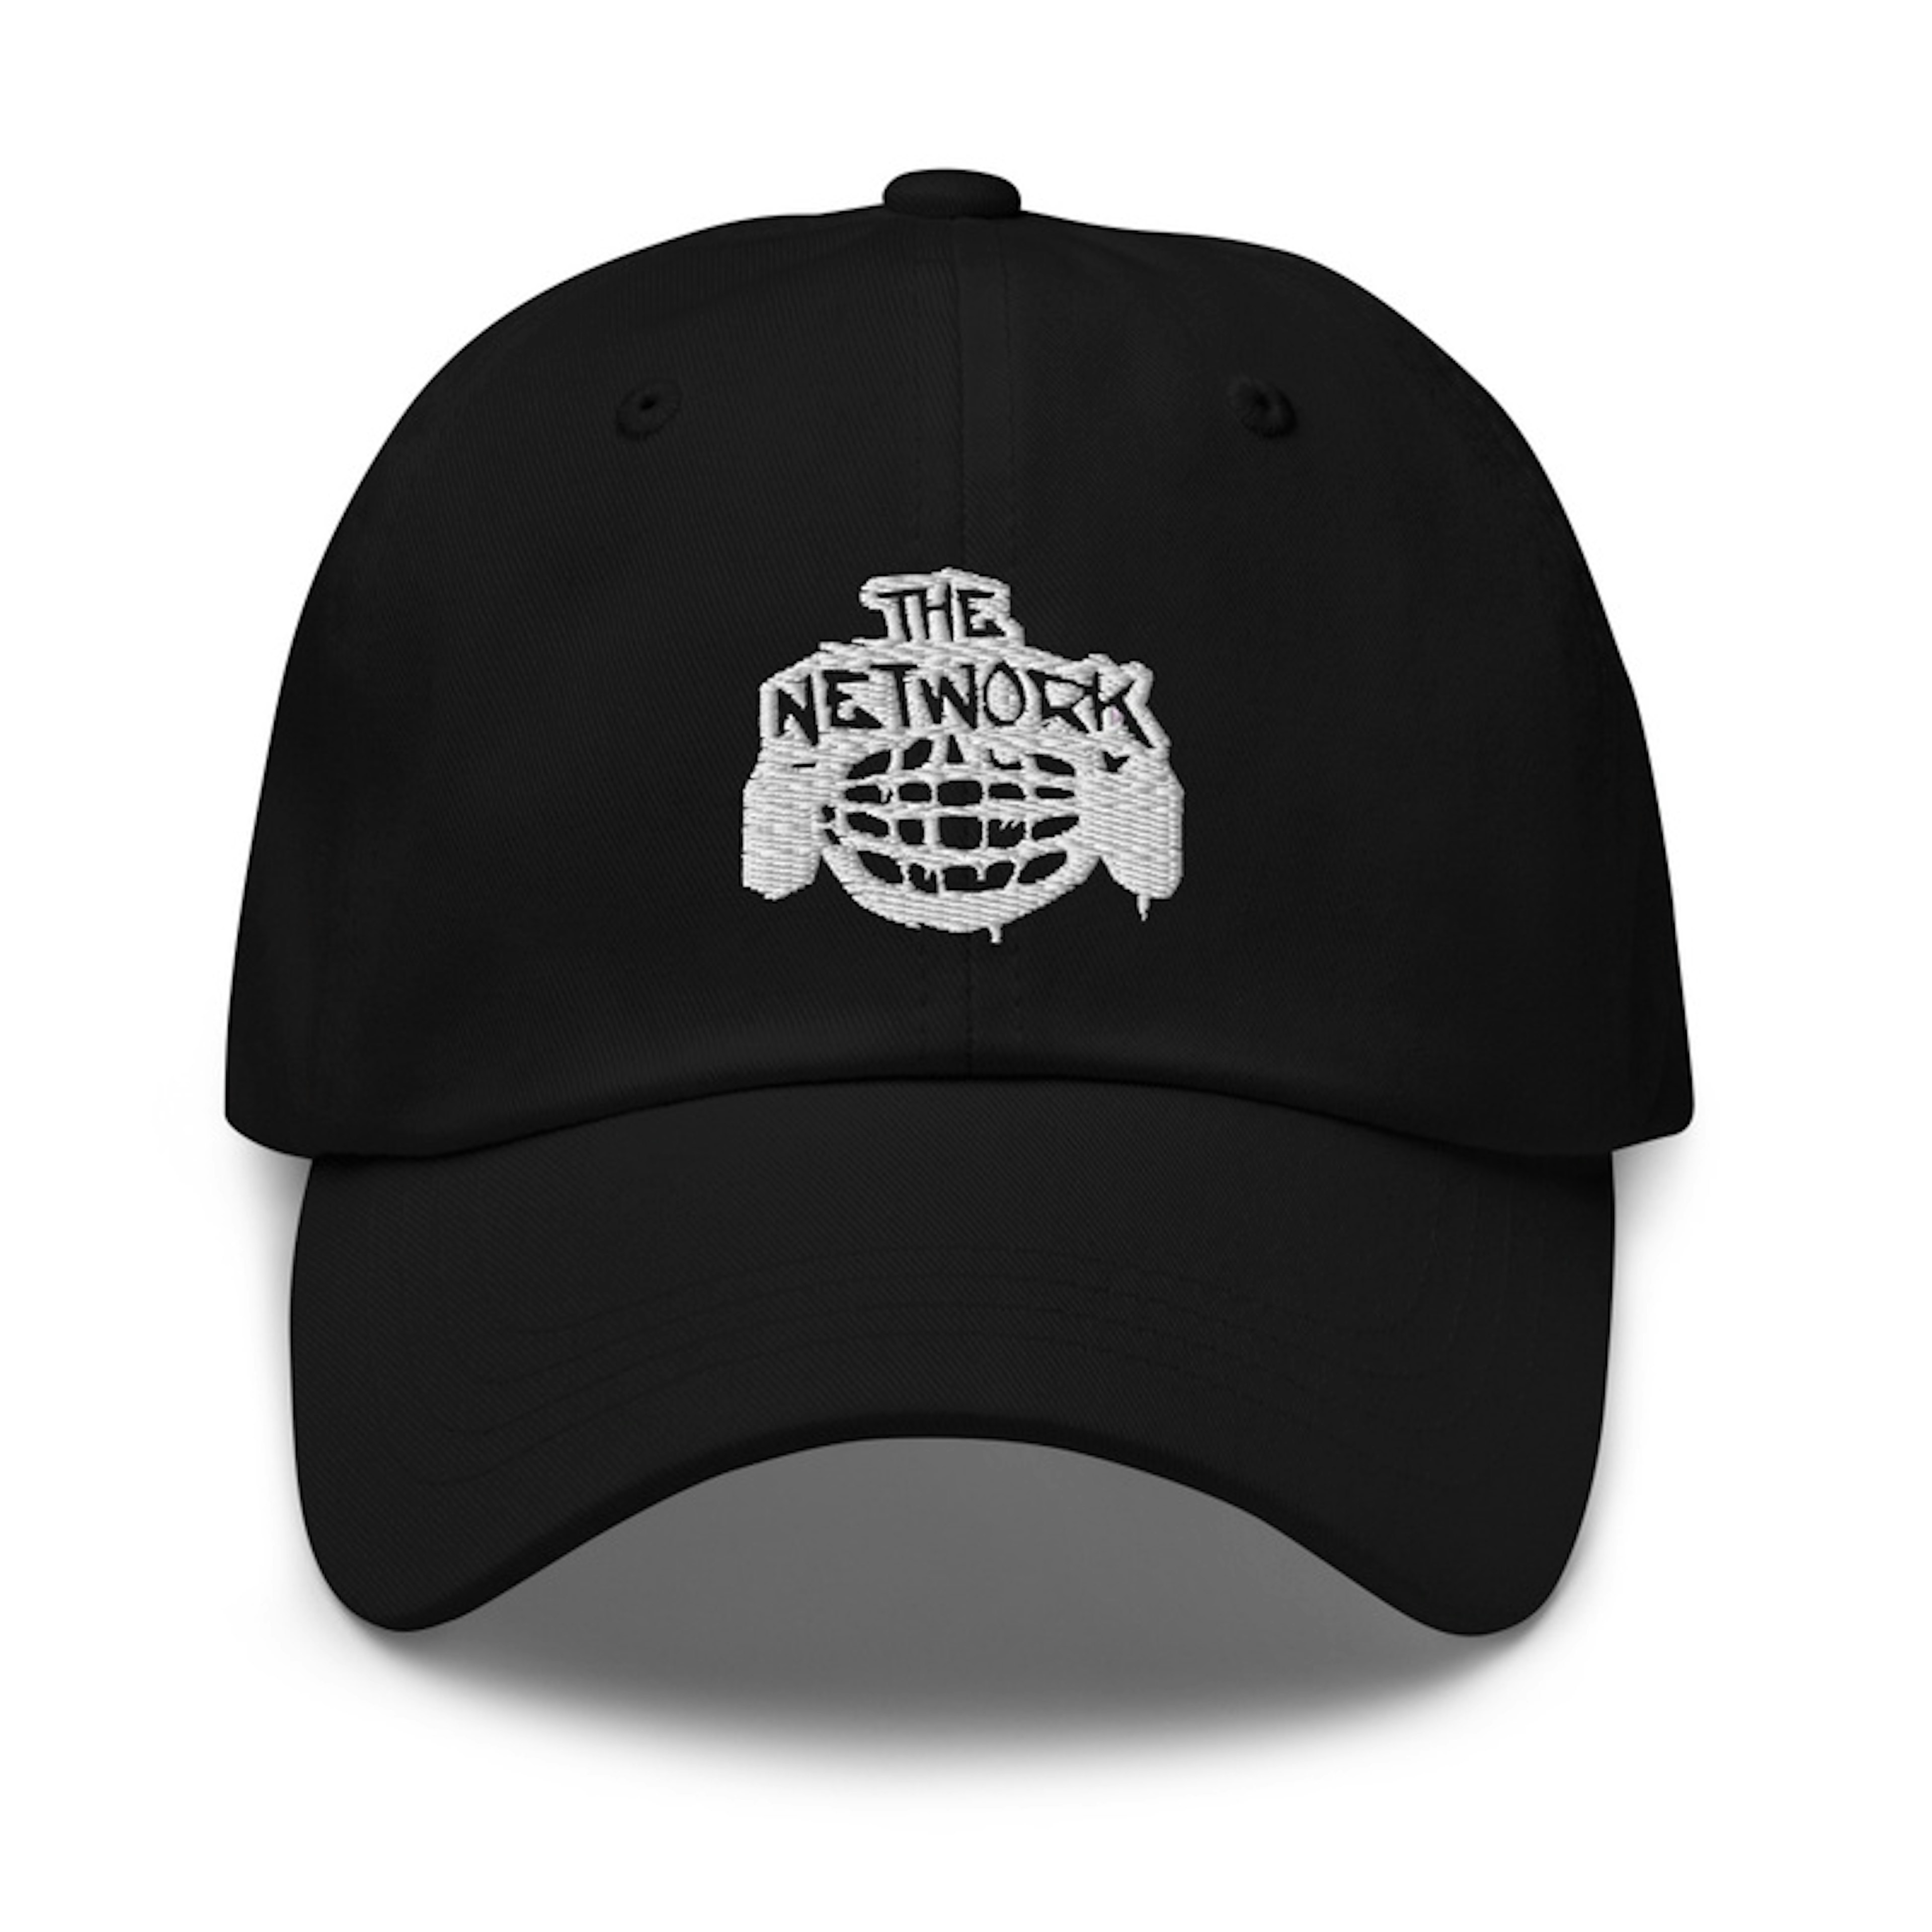 HFR "The Network" Logo Dad Cap